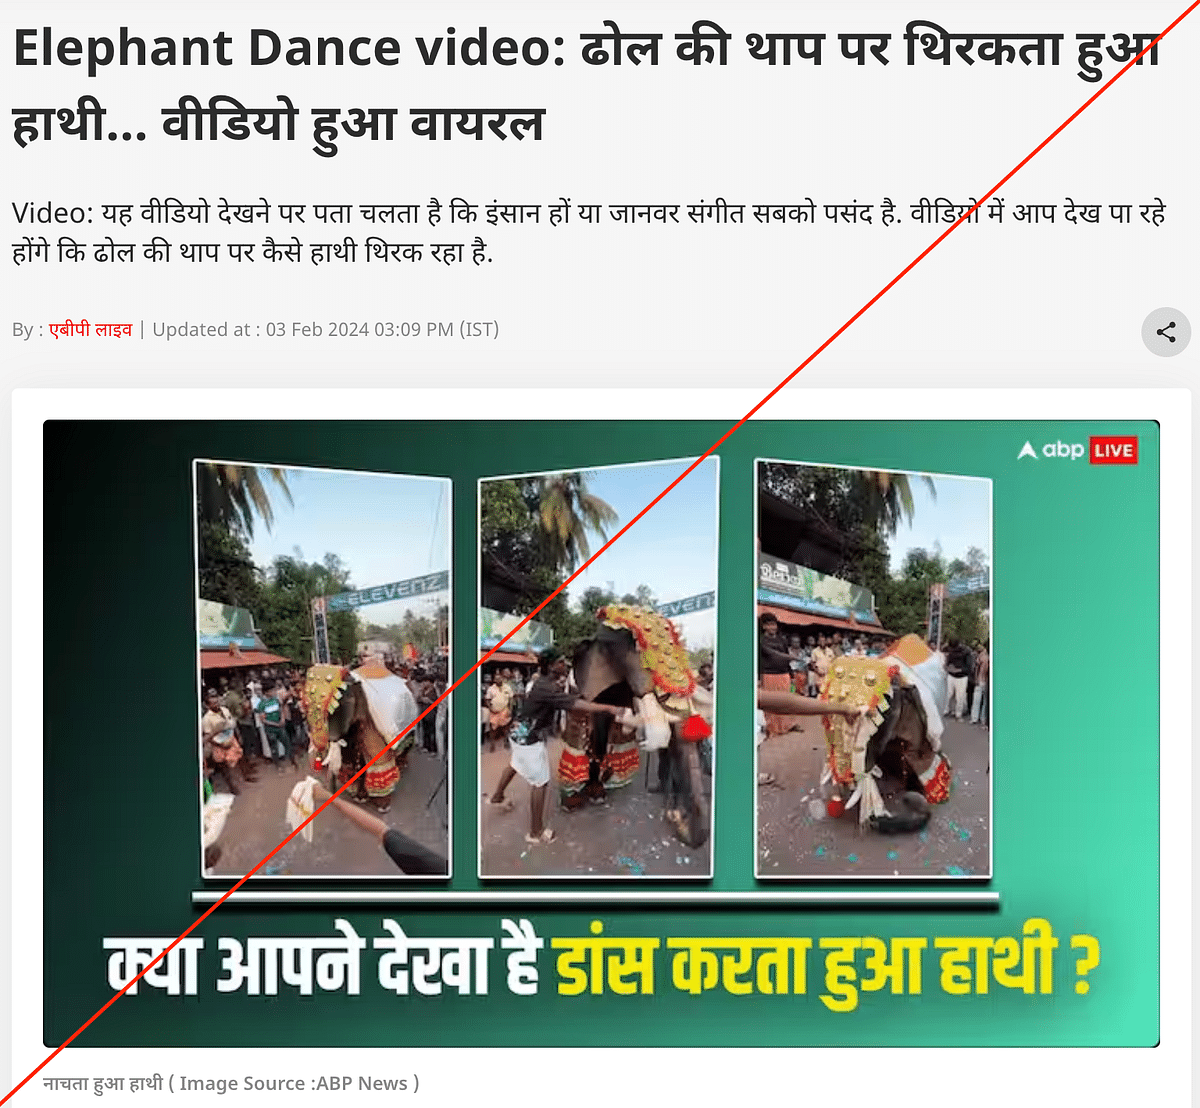 The organiser of the event told The Quint that the viral video is of a person performing with an elephant costume.